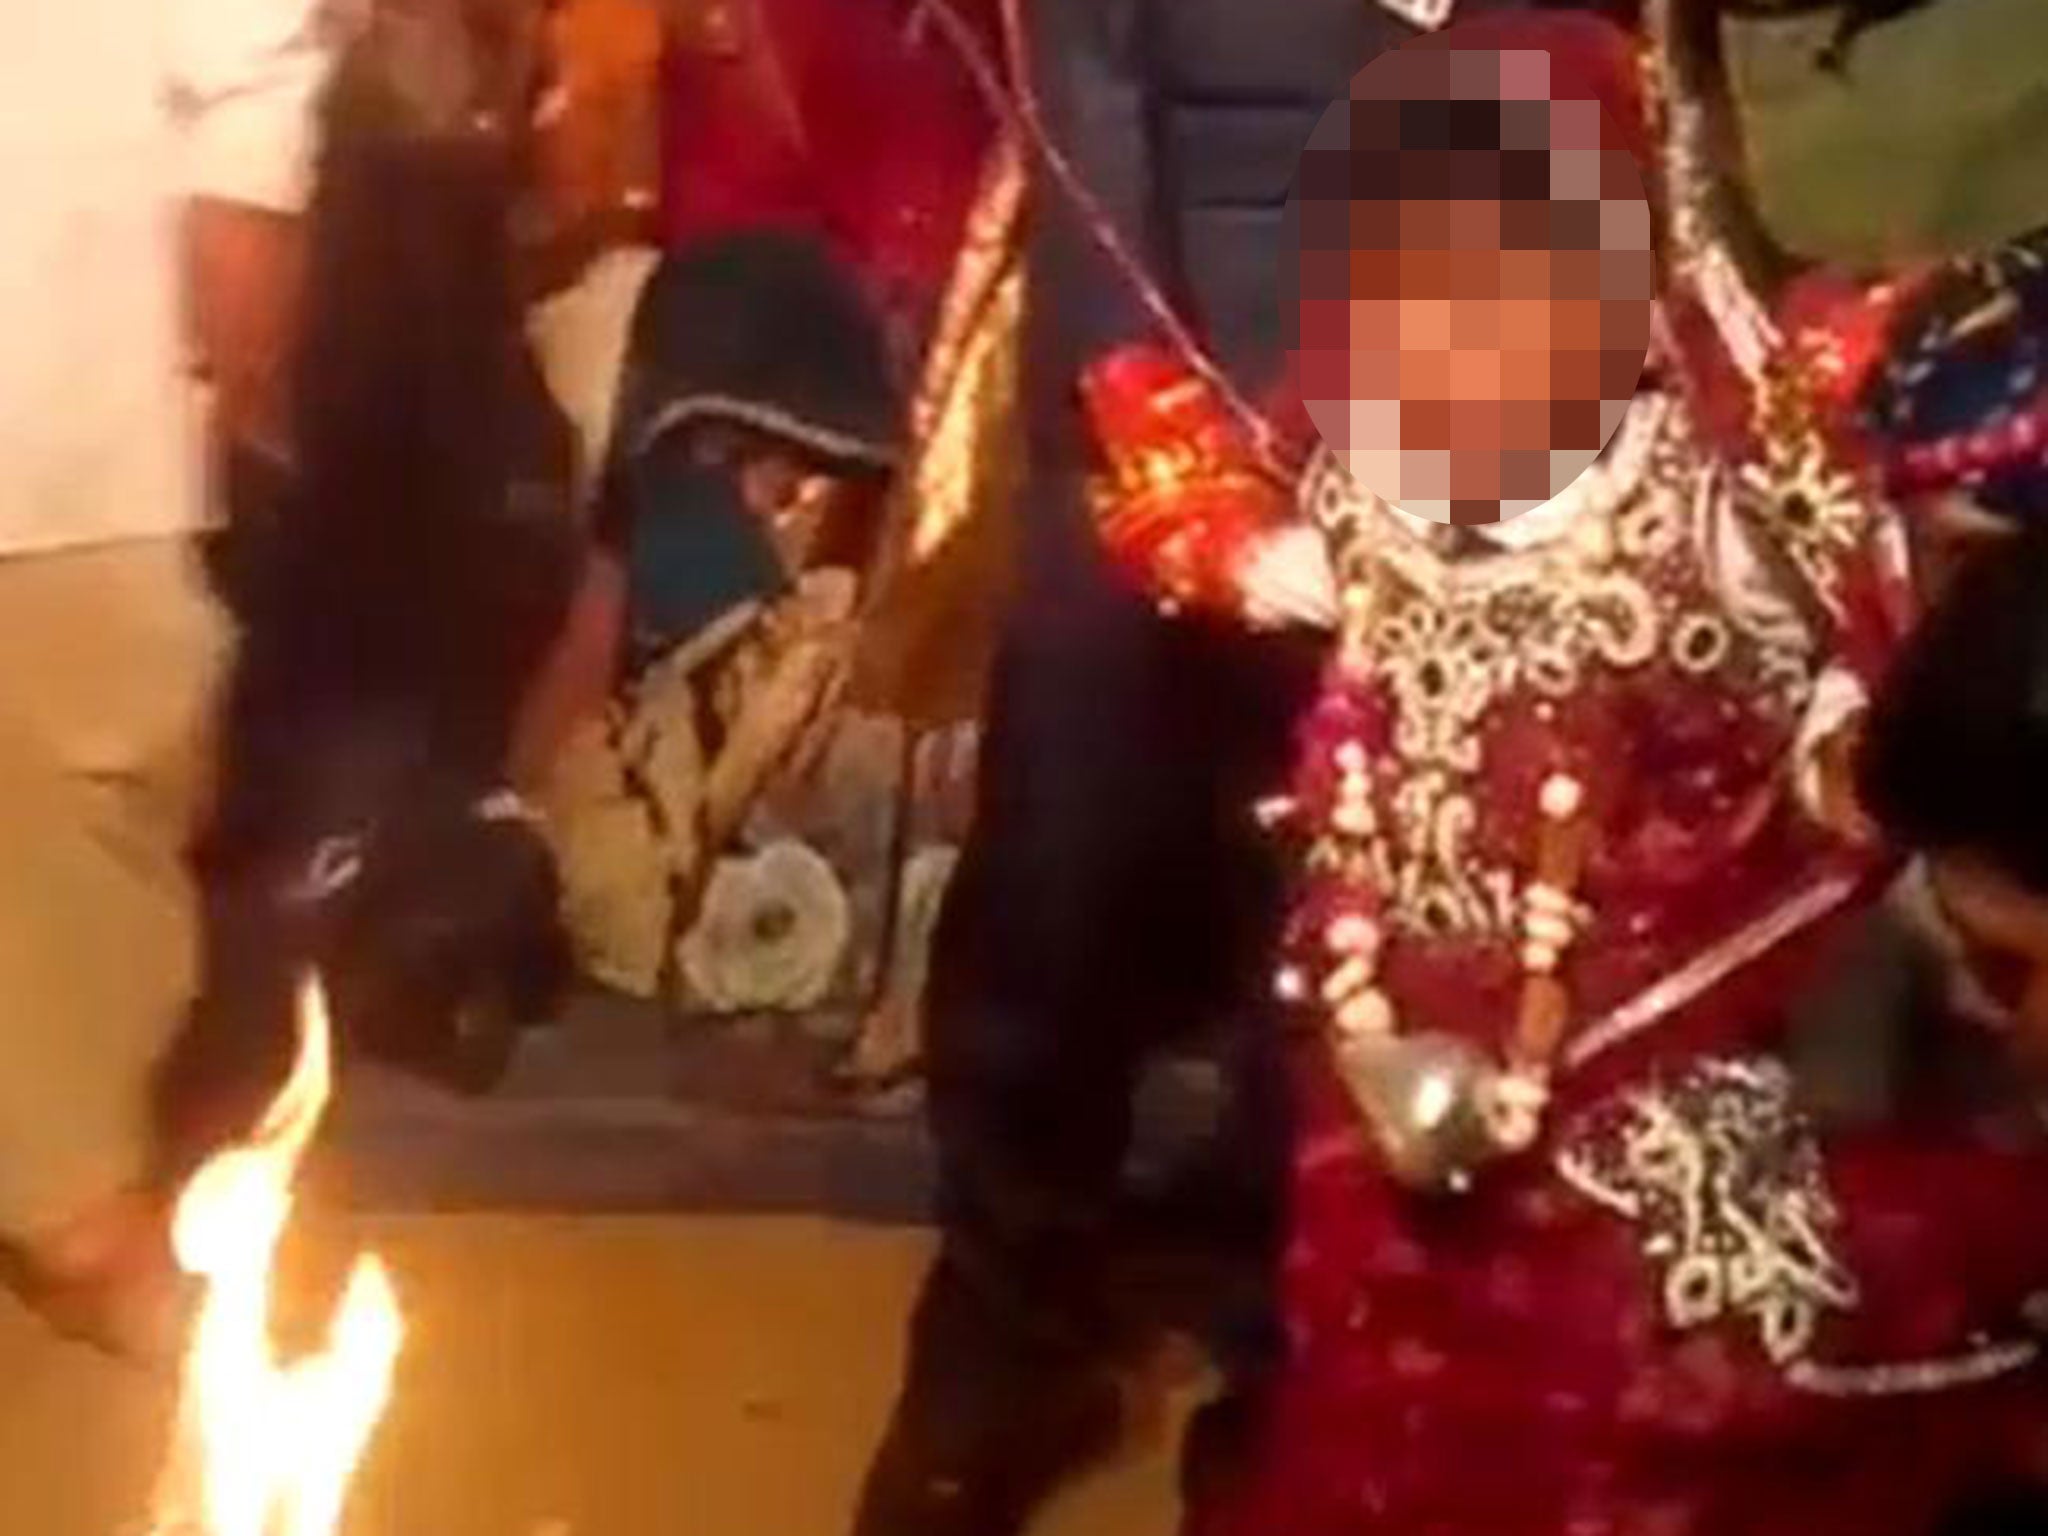 Rajasthani Old Women Sex - Video shows five-year-old girl crying during mass child wedding in India |  The Independent | The Independent